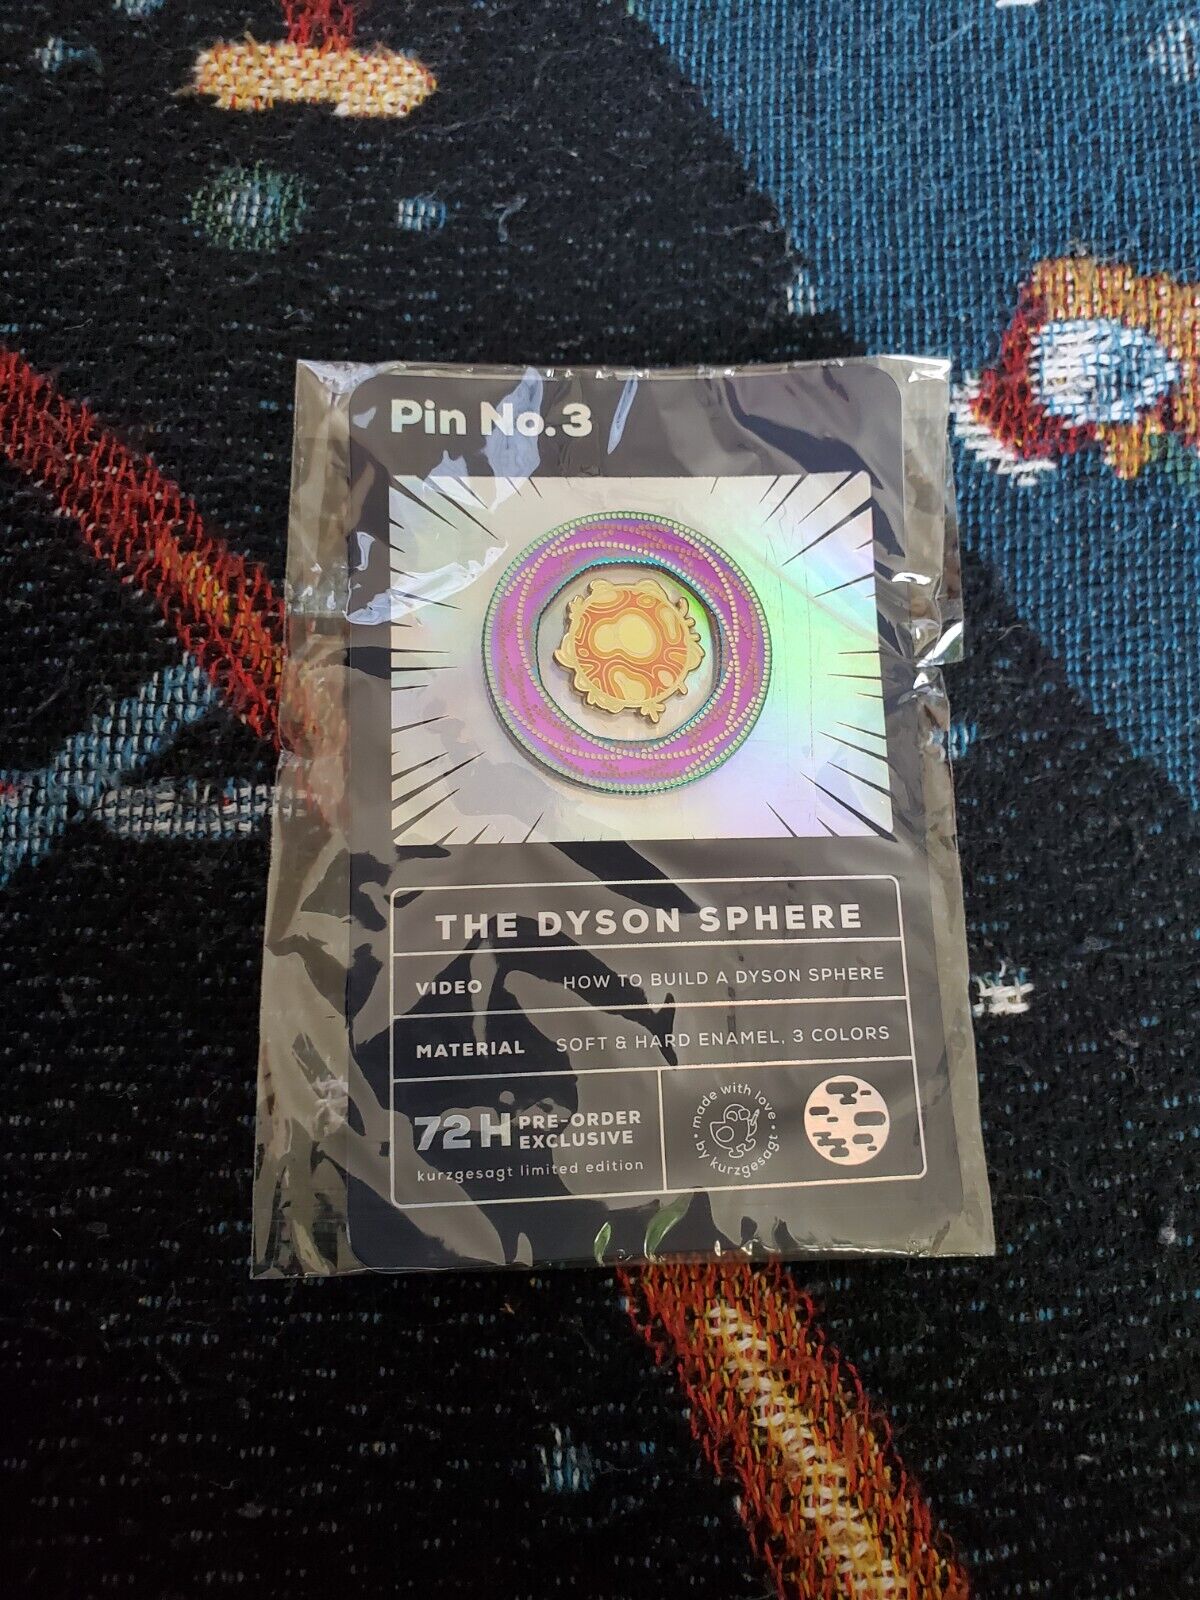 Kurzgesagt - Limited Edition Dyson Sphere Pin in wrapper 